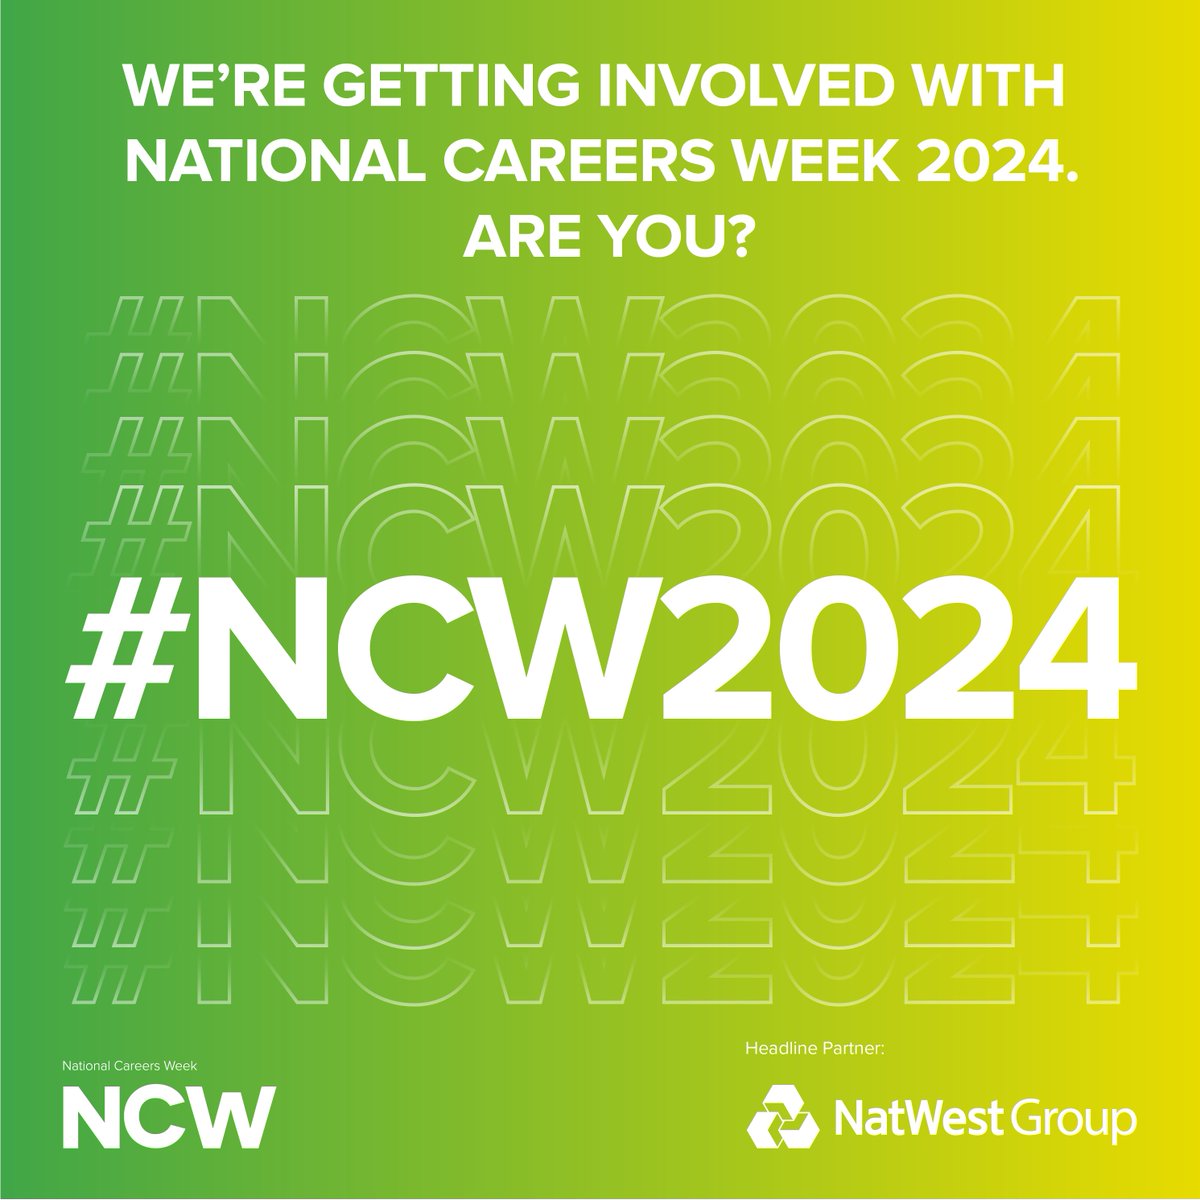 This week is National Careers week. Visit the website below to find useful events and resources for everything careers related! ncw2020.co.uk #NCW2024